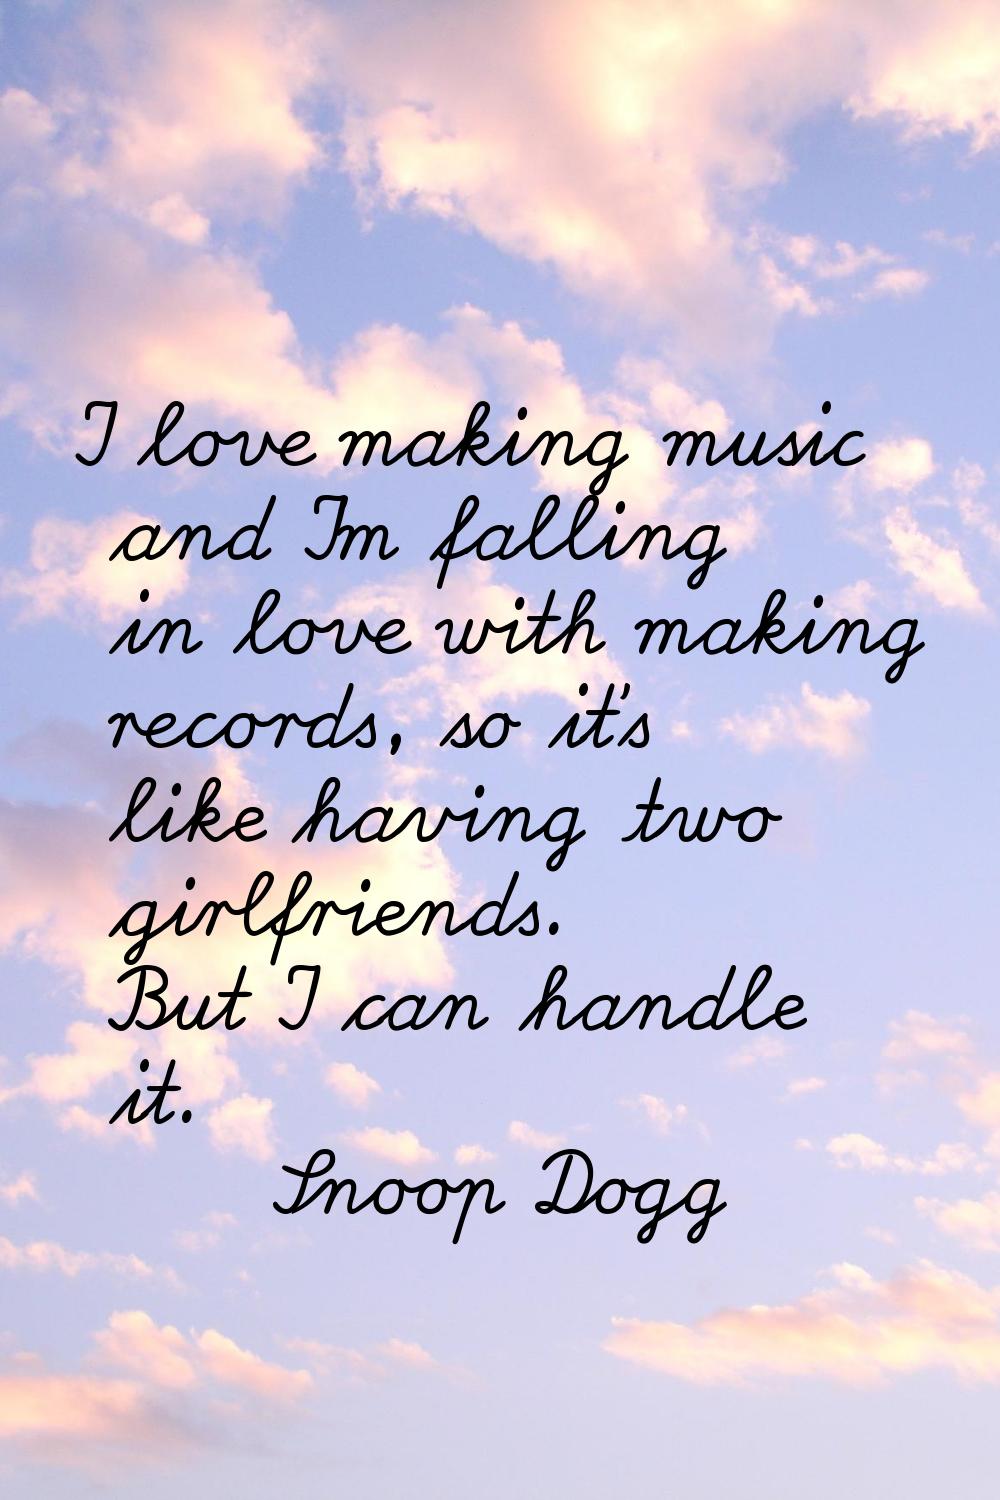 I love making music and I'm falling in love with making records, so it's like having two girlfriend